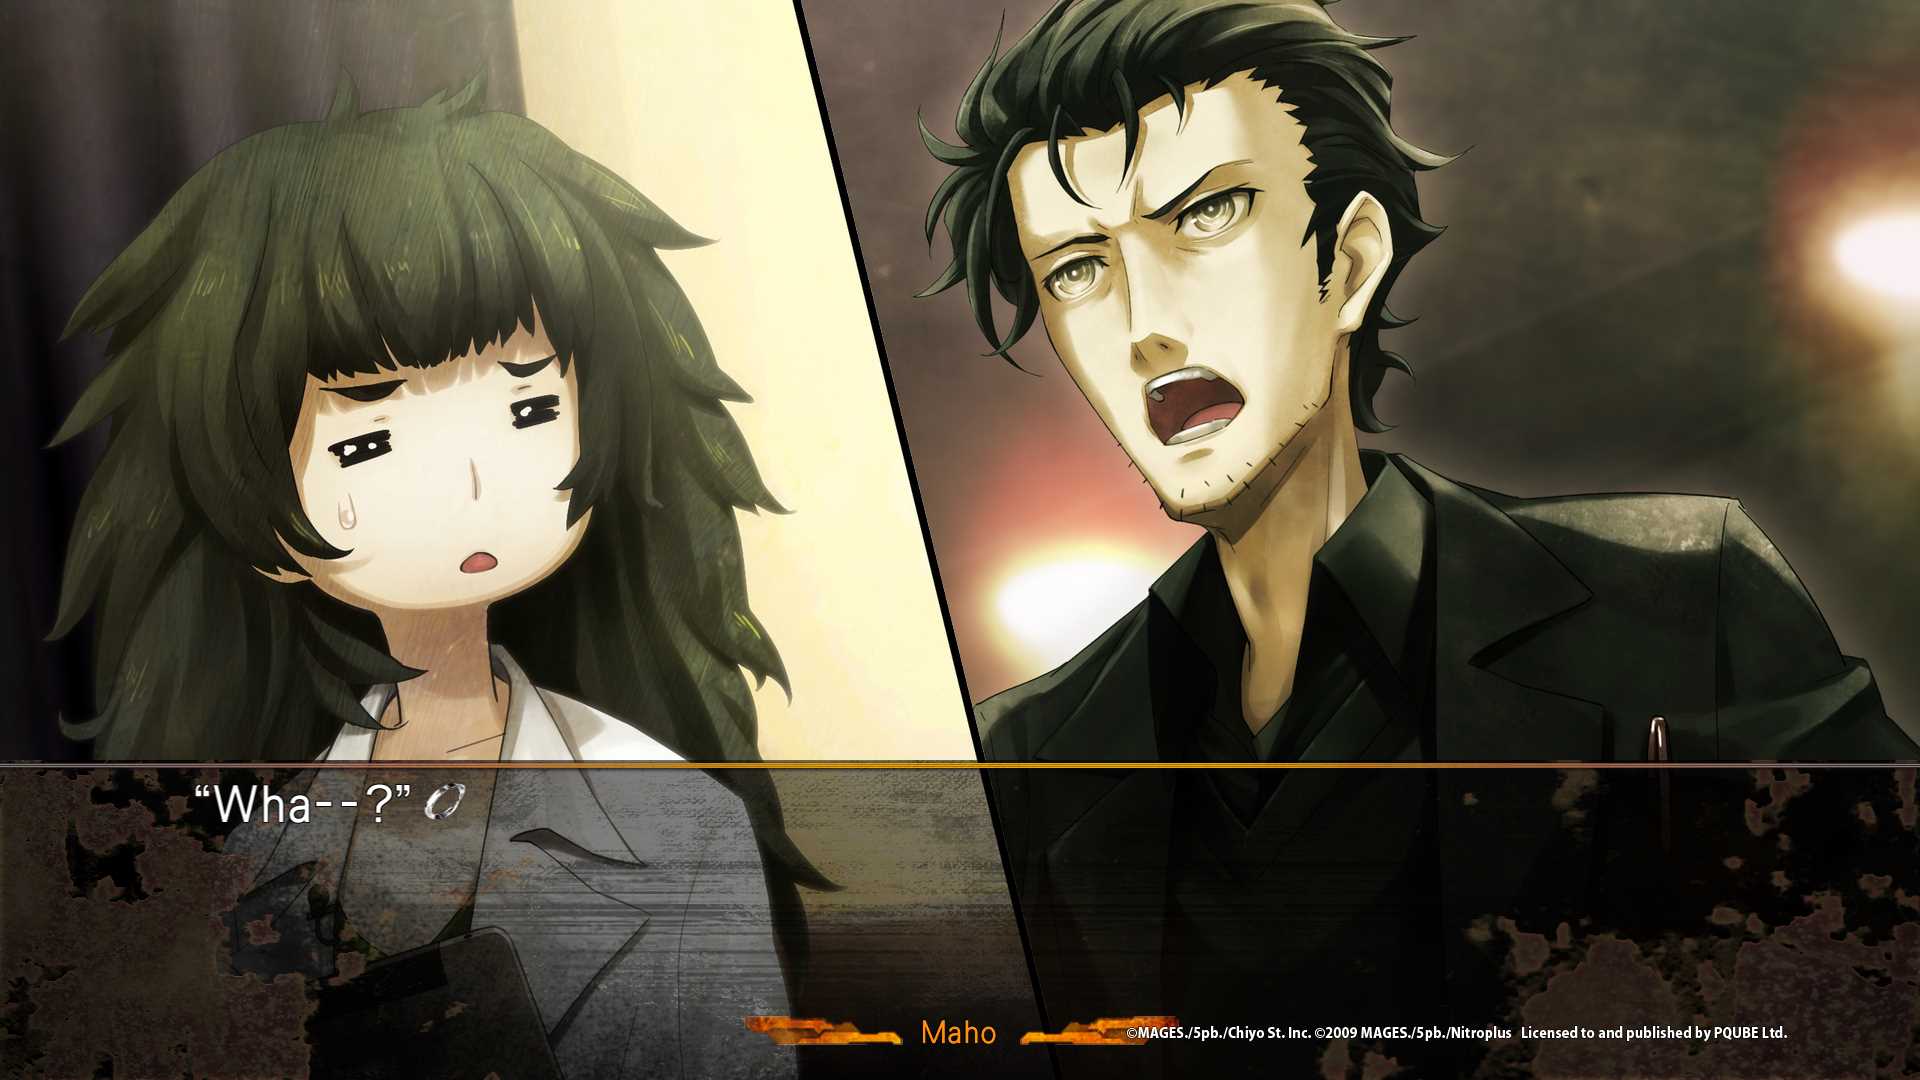 Steins Gate 0 Wallpapers Top Free Steins Gate 0 Backgrounds Wallpaperaccess